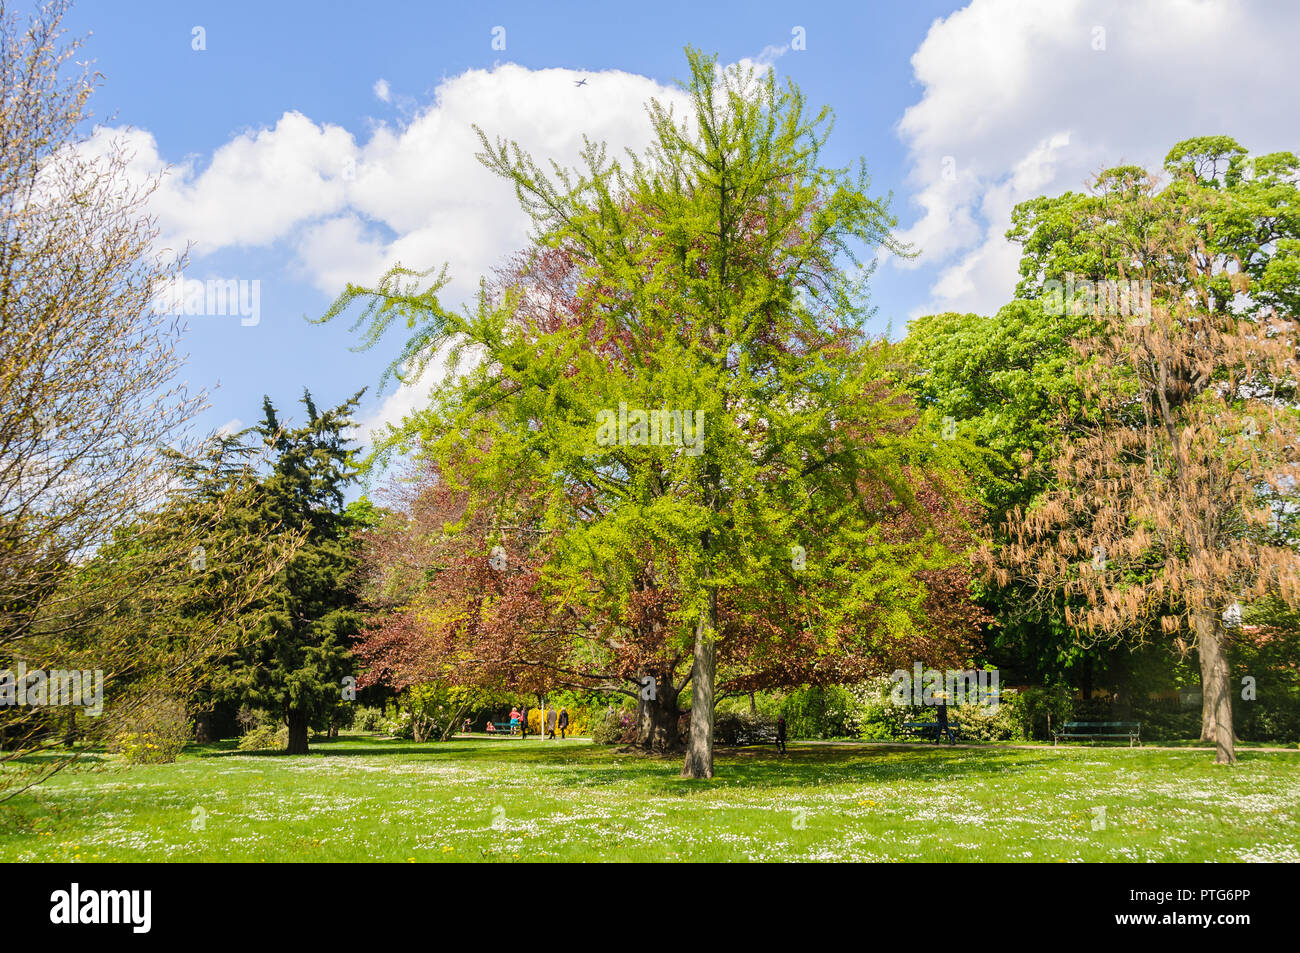 The garden in Schoenbrunn Palace in the city of Vienna, Austria Stock Photo